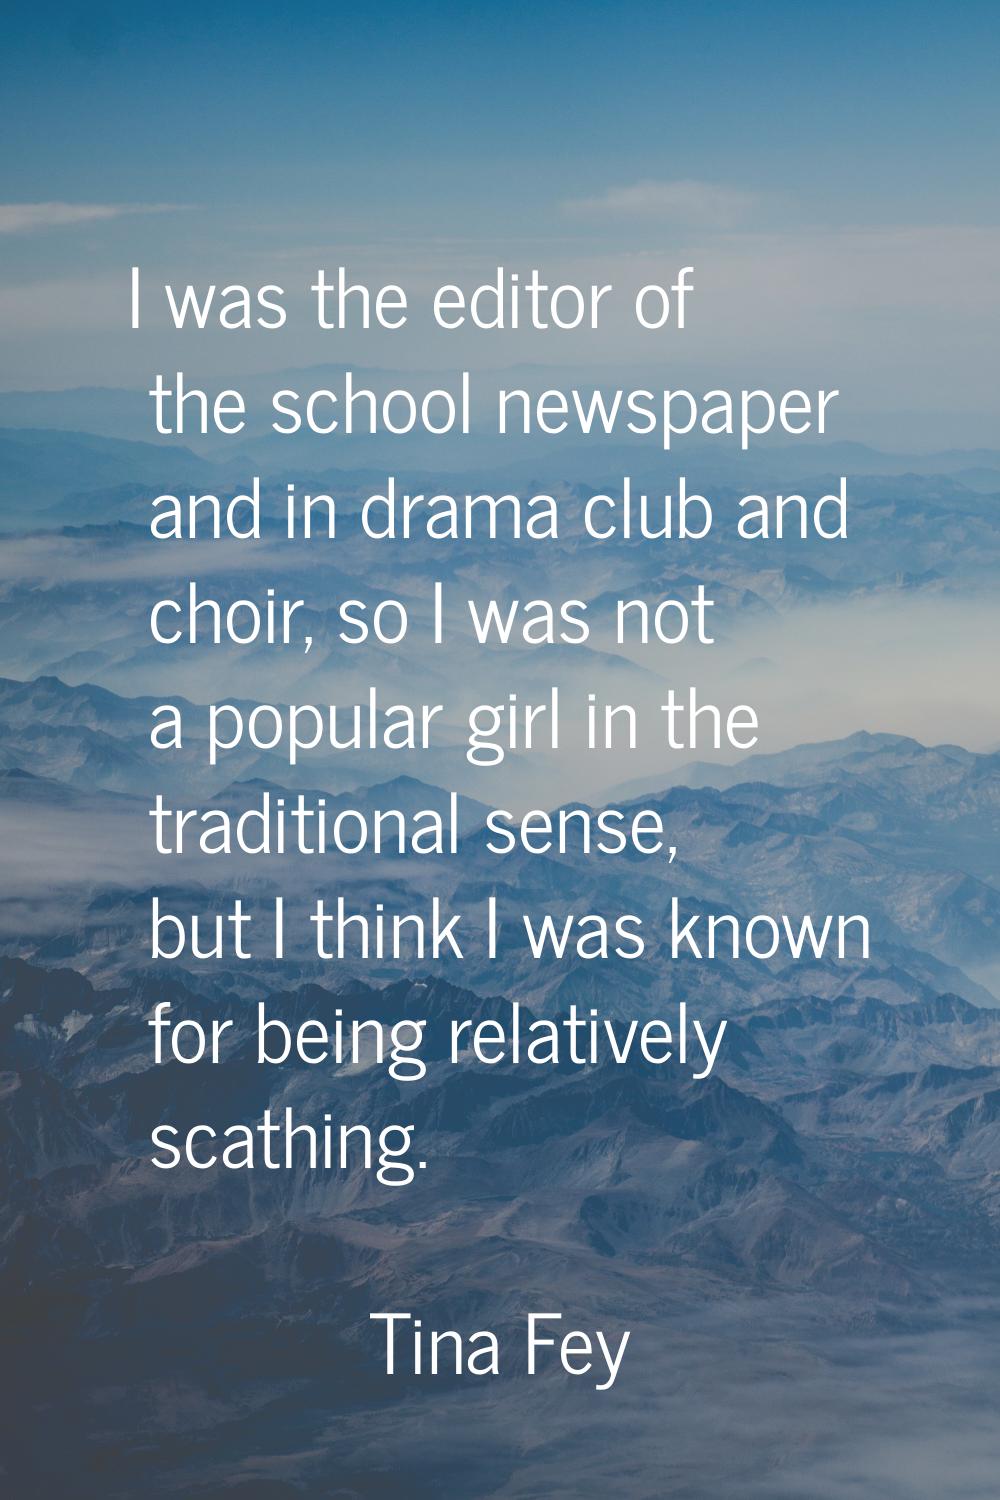 I was the editor of the school newspaper and in drama club and choir, so I was not a popular girl i